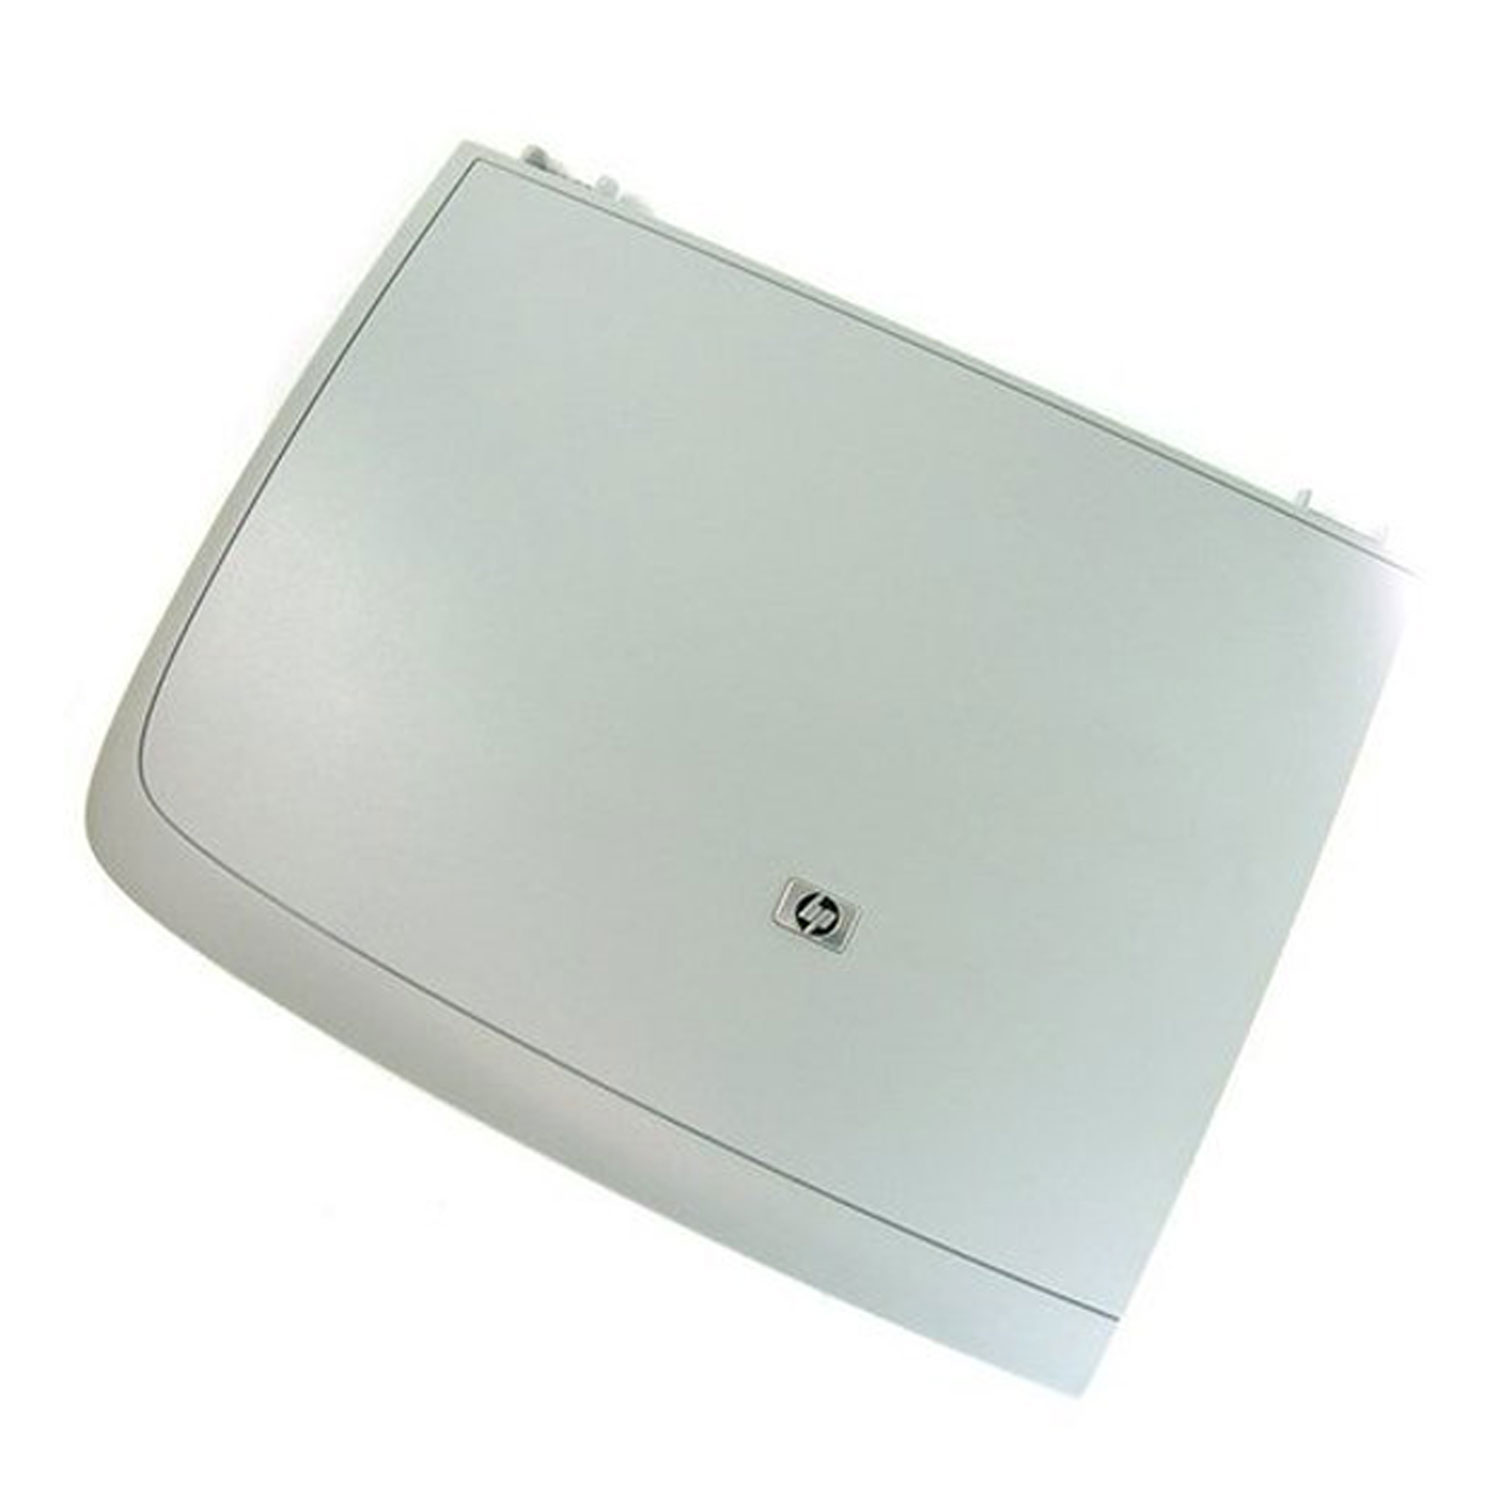 Hp M1005 SCANER TOP COVER FOR USE IN HP M 1005 PRINTER